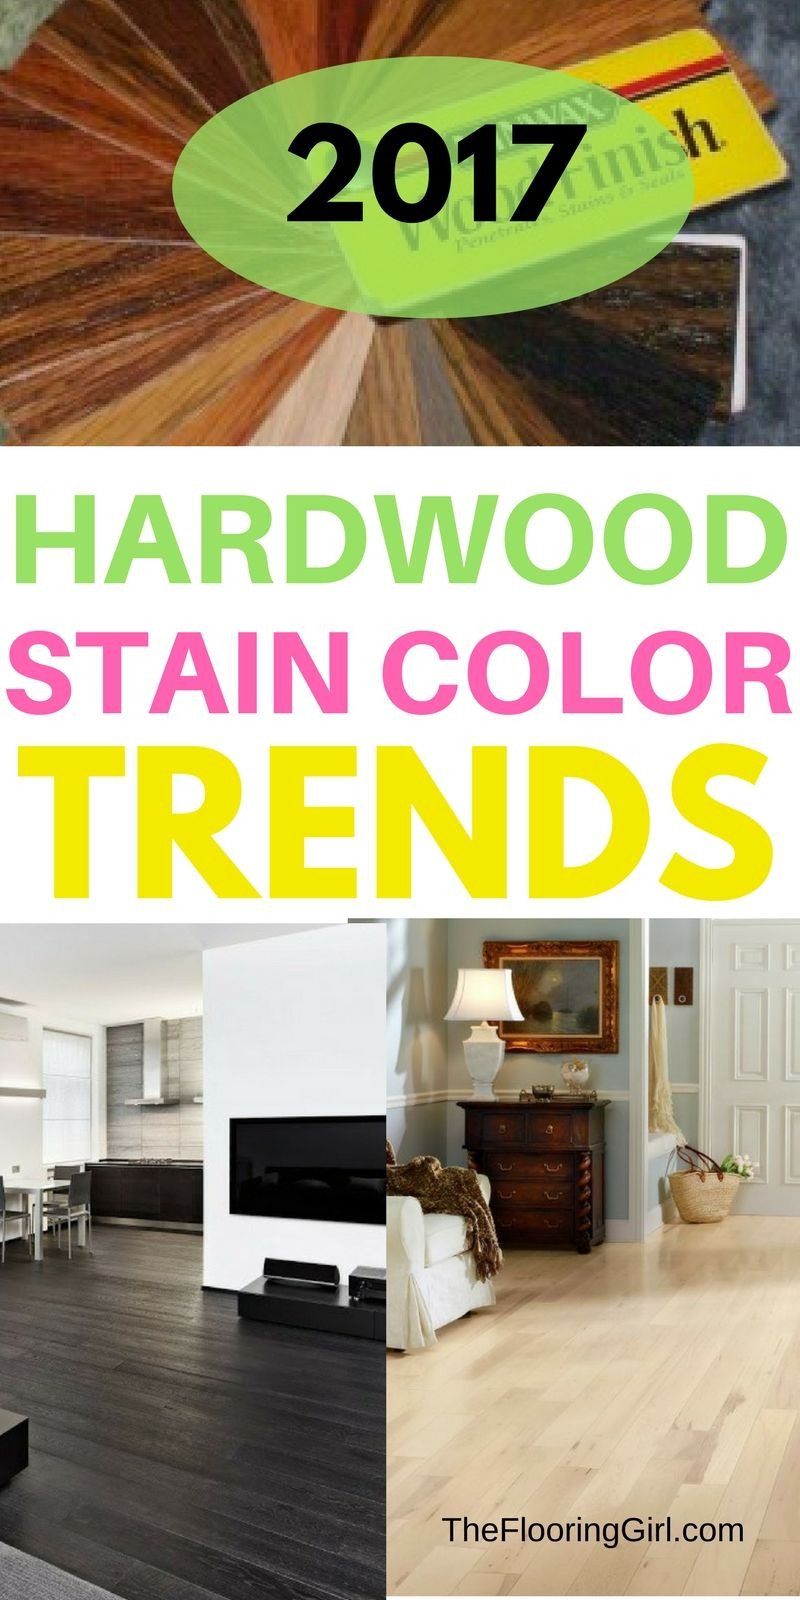 30 Recommended Hardwood Floor Glue 2024 free download hardwood floor glue of hardwood flooring stain color trends 2018 more from the flooring with regard to hardwood flooring stain color trends for 2017 hardwood colors that are in style thefloo